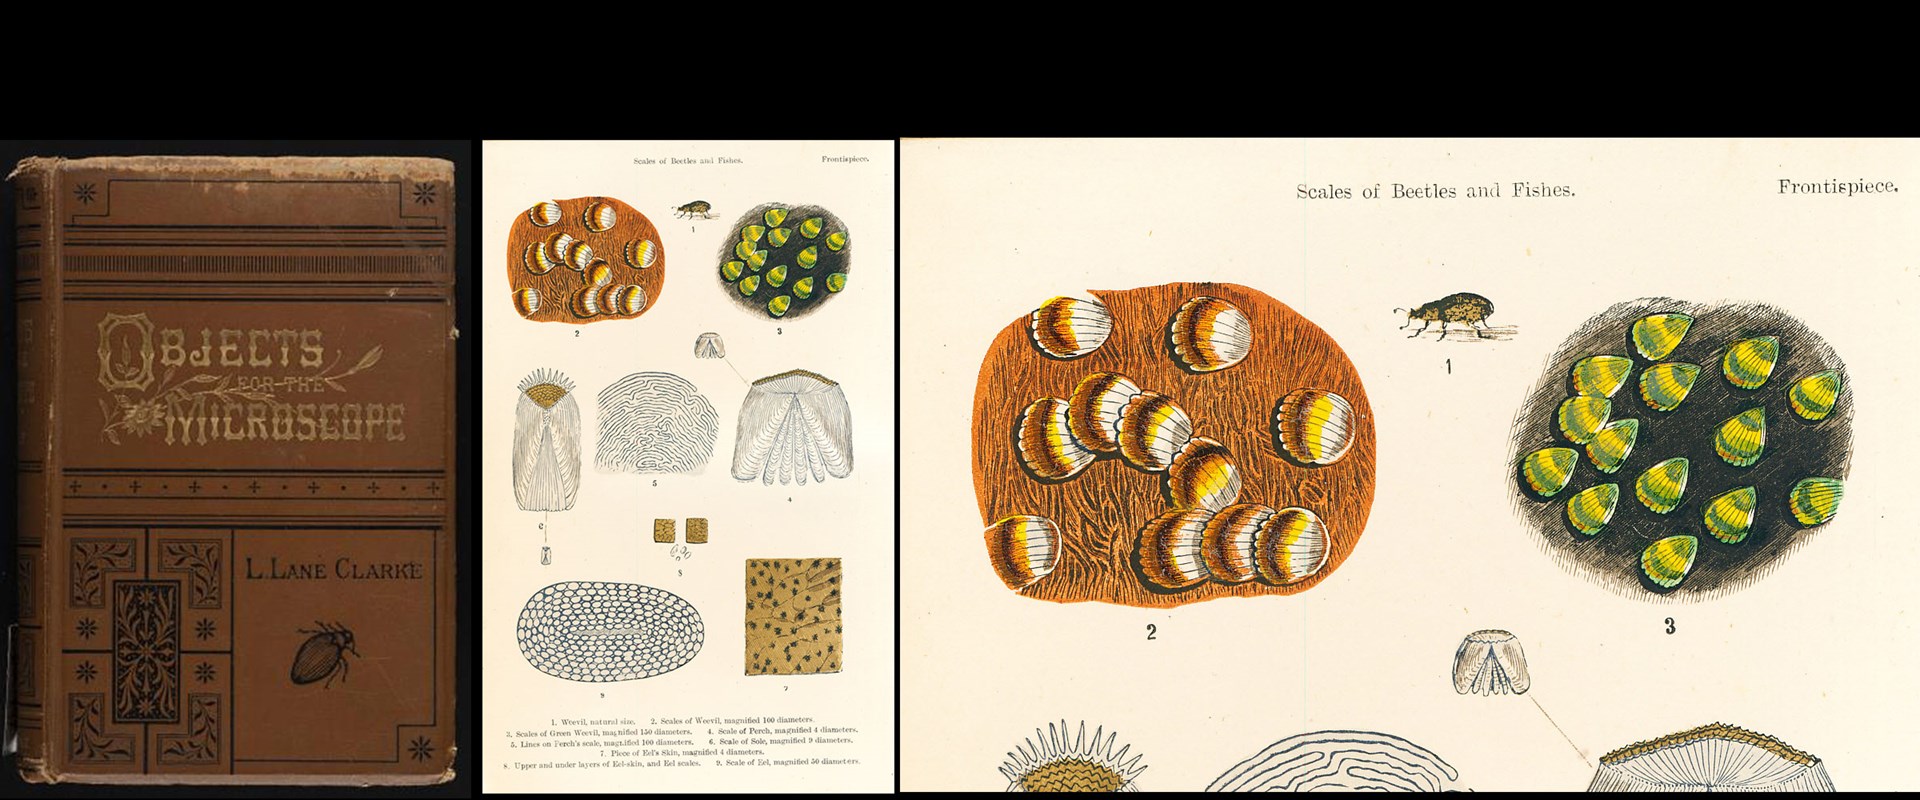 Cover and page from 'Objects for the Microscope'  by Louisa Lane Clarke (1887)